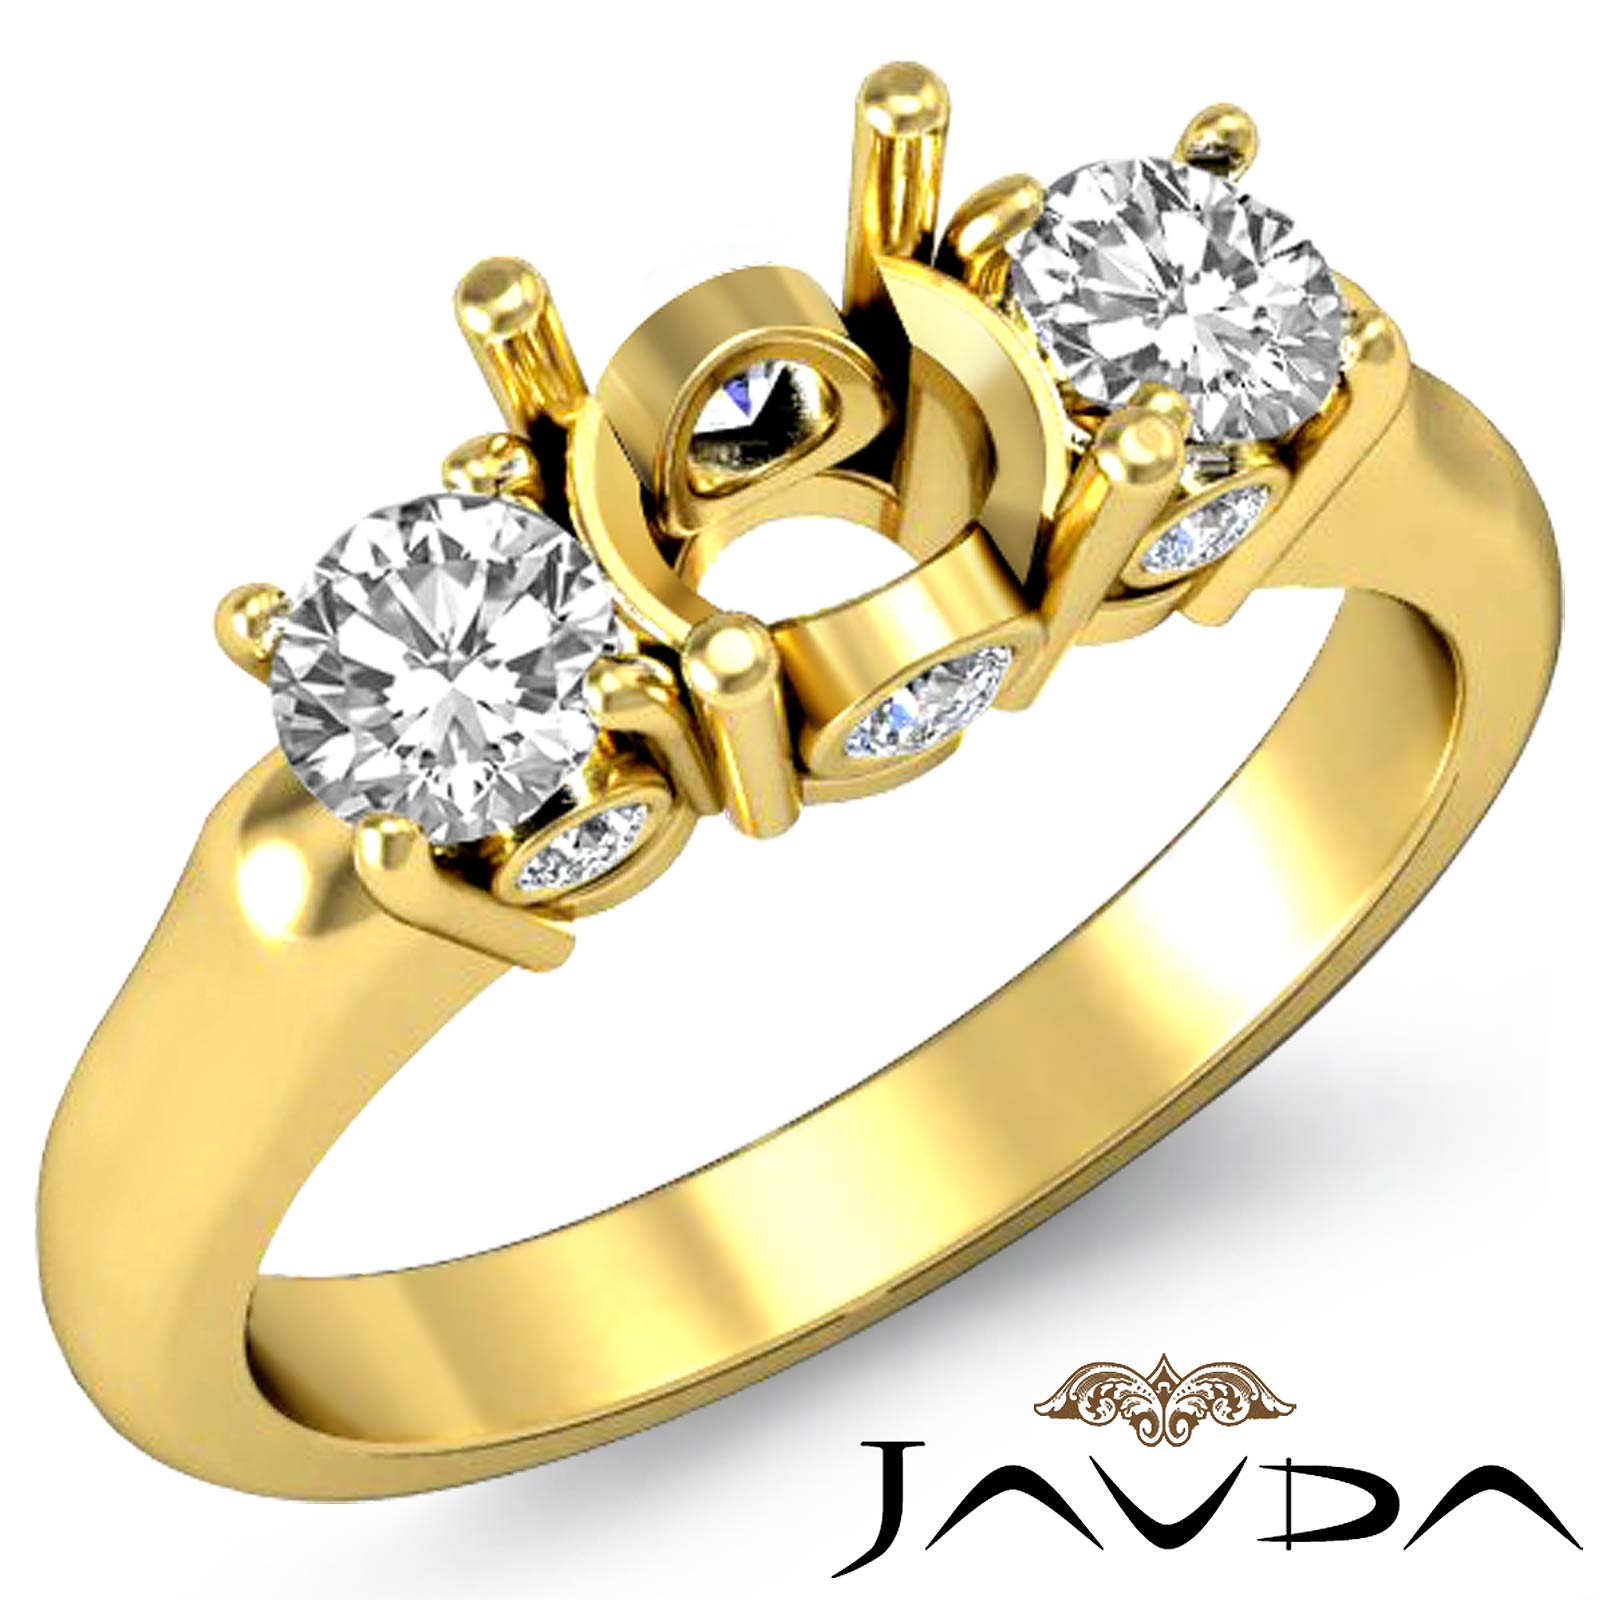 Sarvad Jewels Mens 3 Stone White Gold Wedding Bands, Size: Free Size at Rs  78629 in Surat